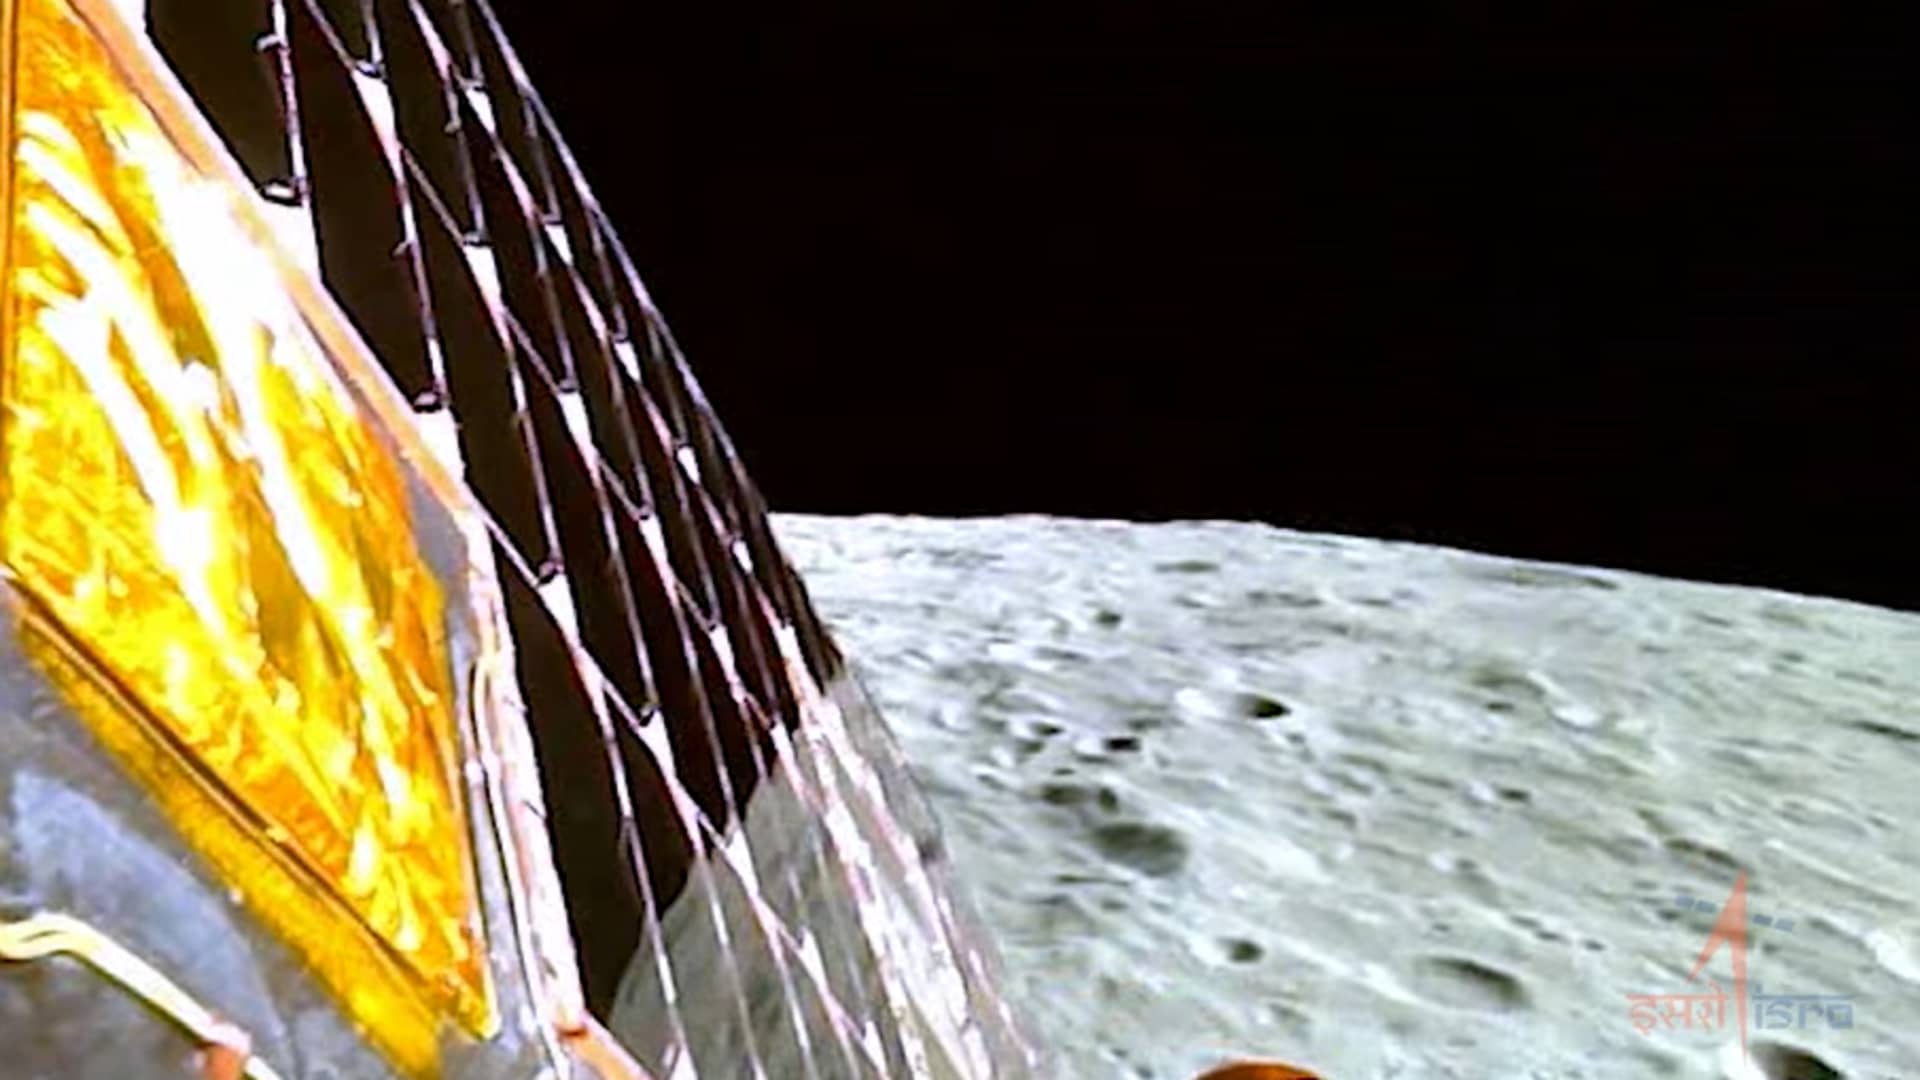 India Chandrayaan-3 lunar mission lands on moon’s south pole